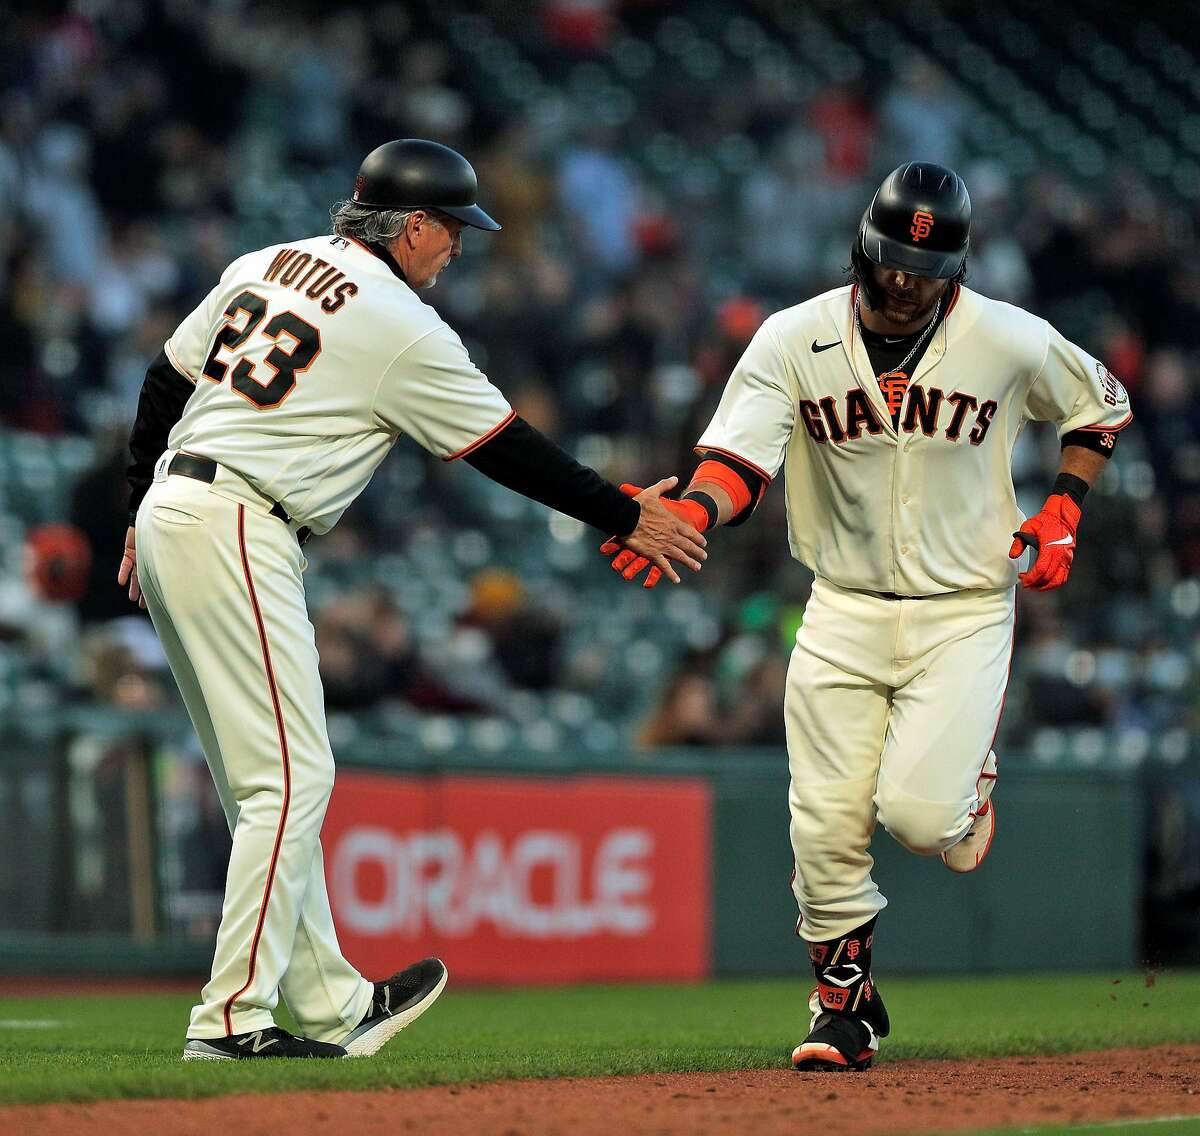 Brandon Crawford (35) high fives third base coach Ron Wotus (23) after hitting his two-run homerun in the fifth inning as the San Francisco Giants played the Arizona Diamondbacks at Oracle Park in San Francisco, Calif., on Monday, June 14, 2021.